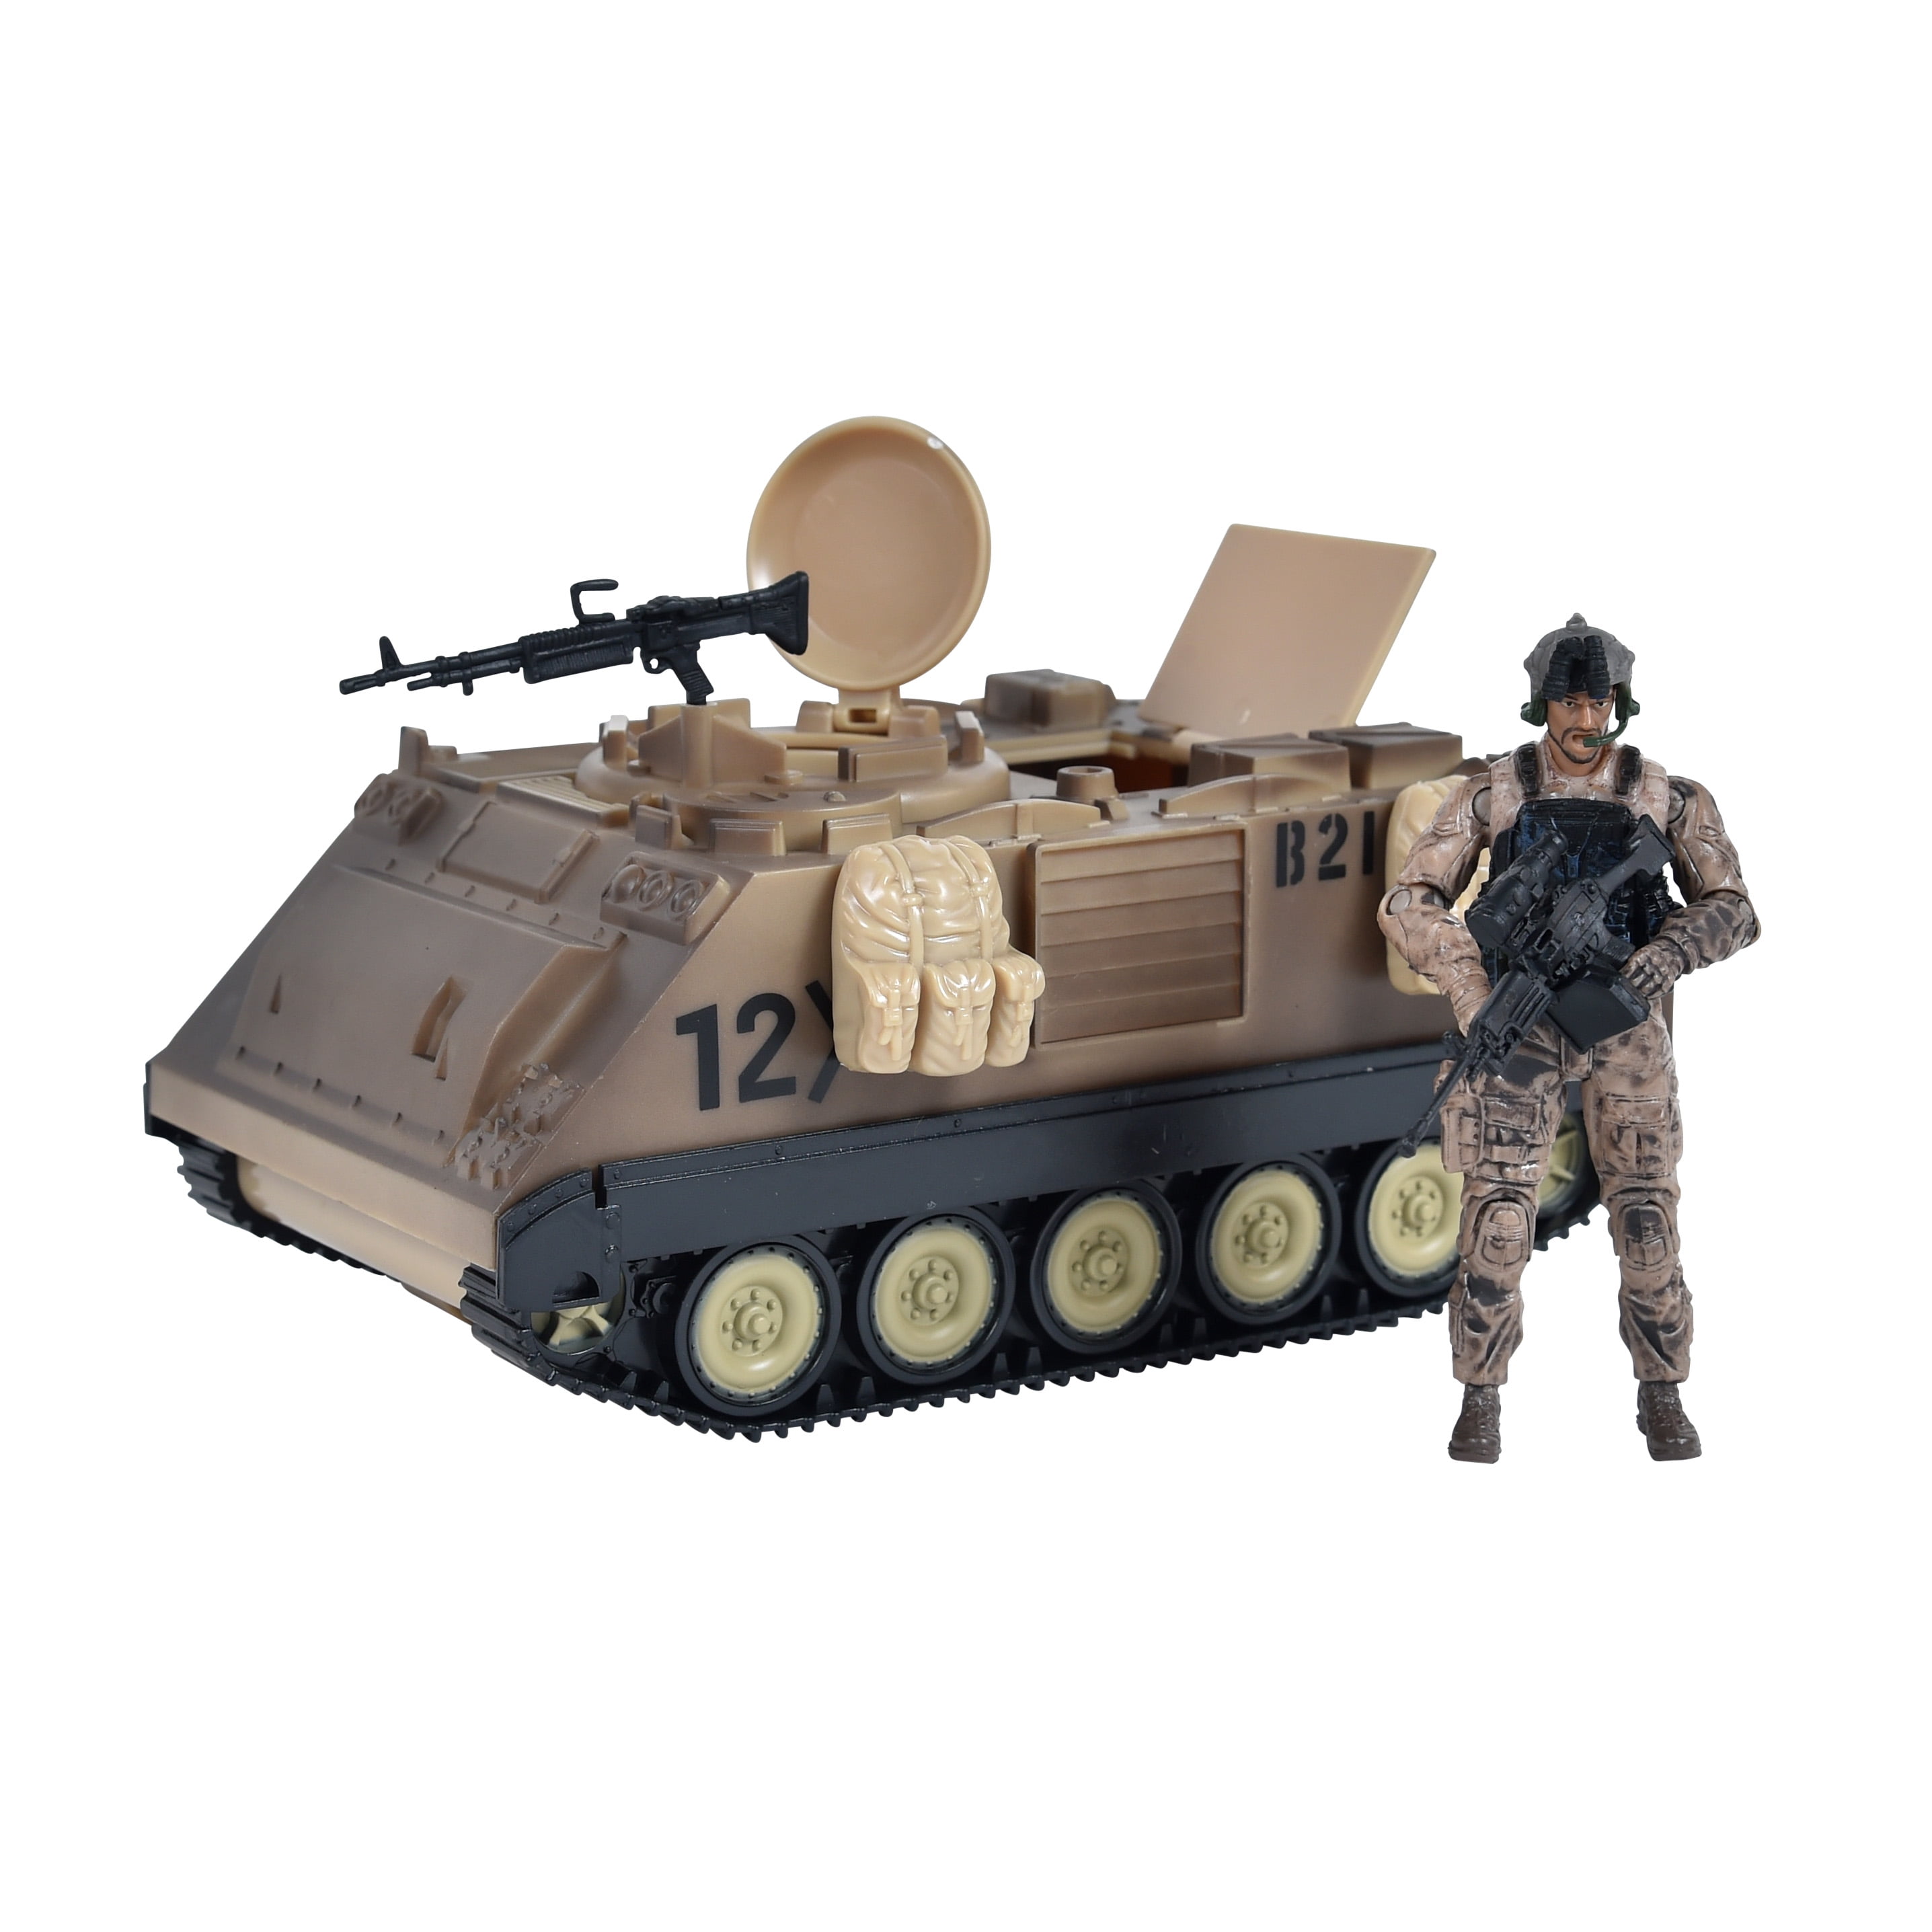 Elite Force Gunner Action Figure Armored Military Vehicle Kids Playset Toy Gift 